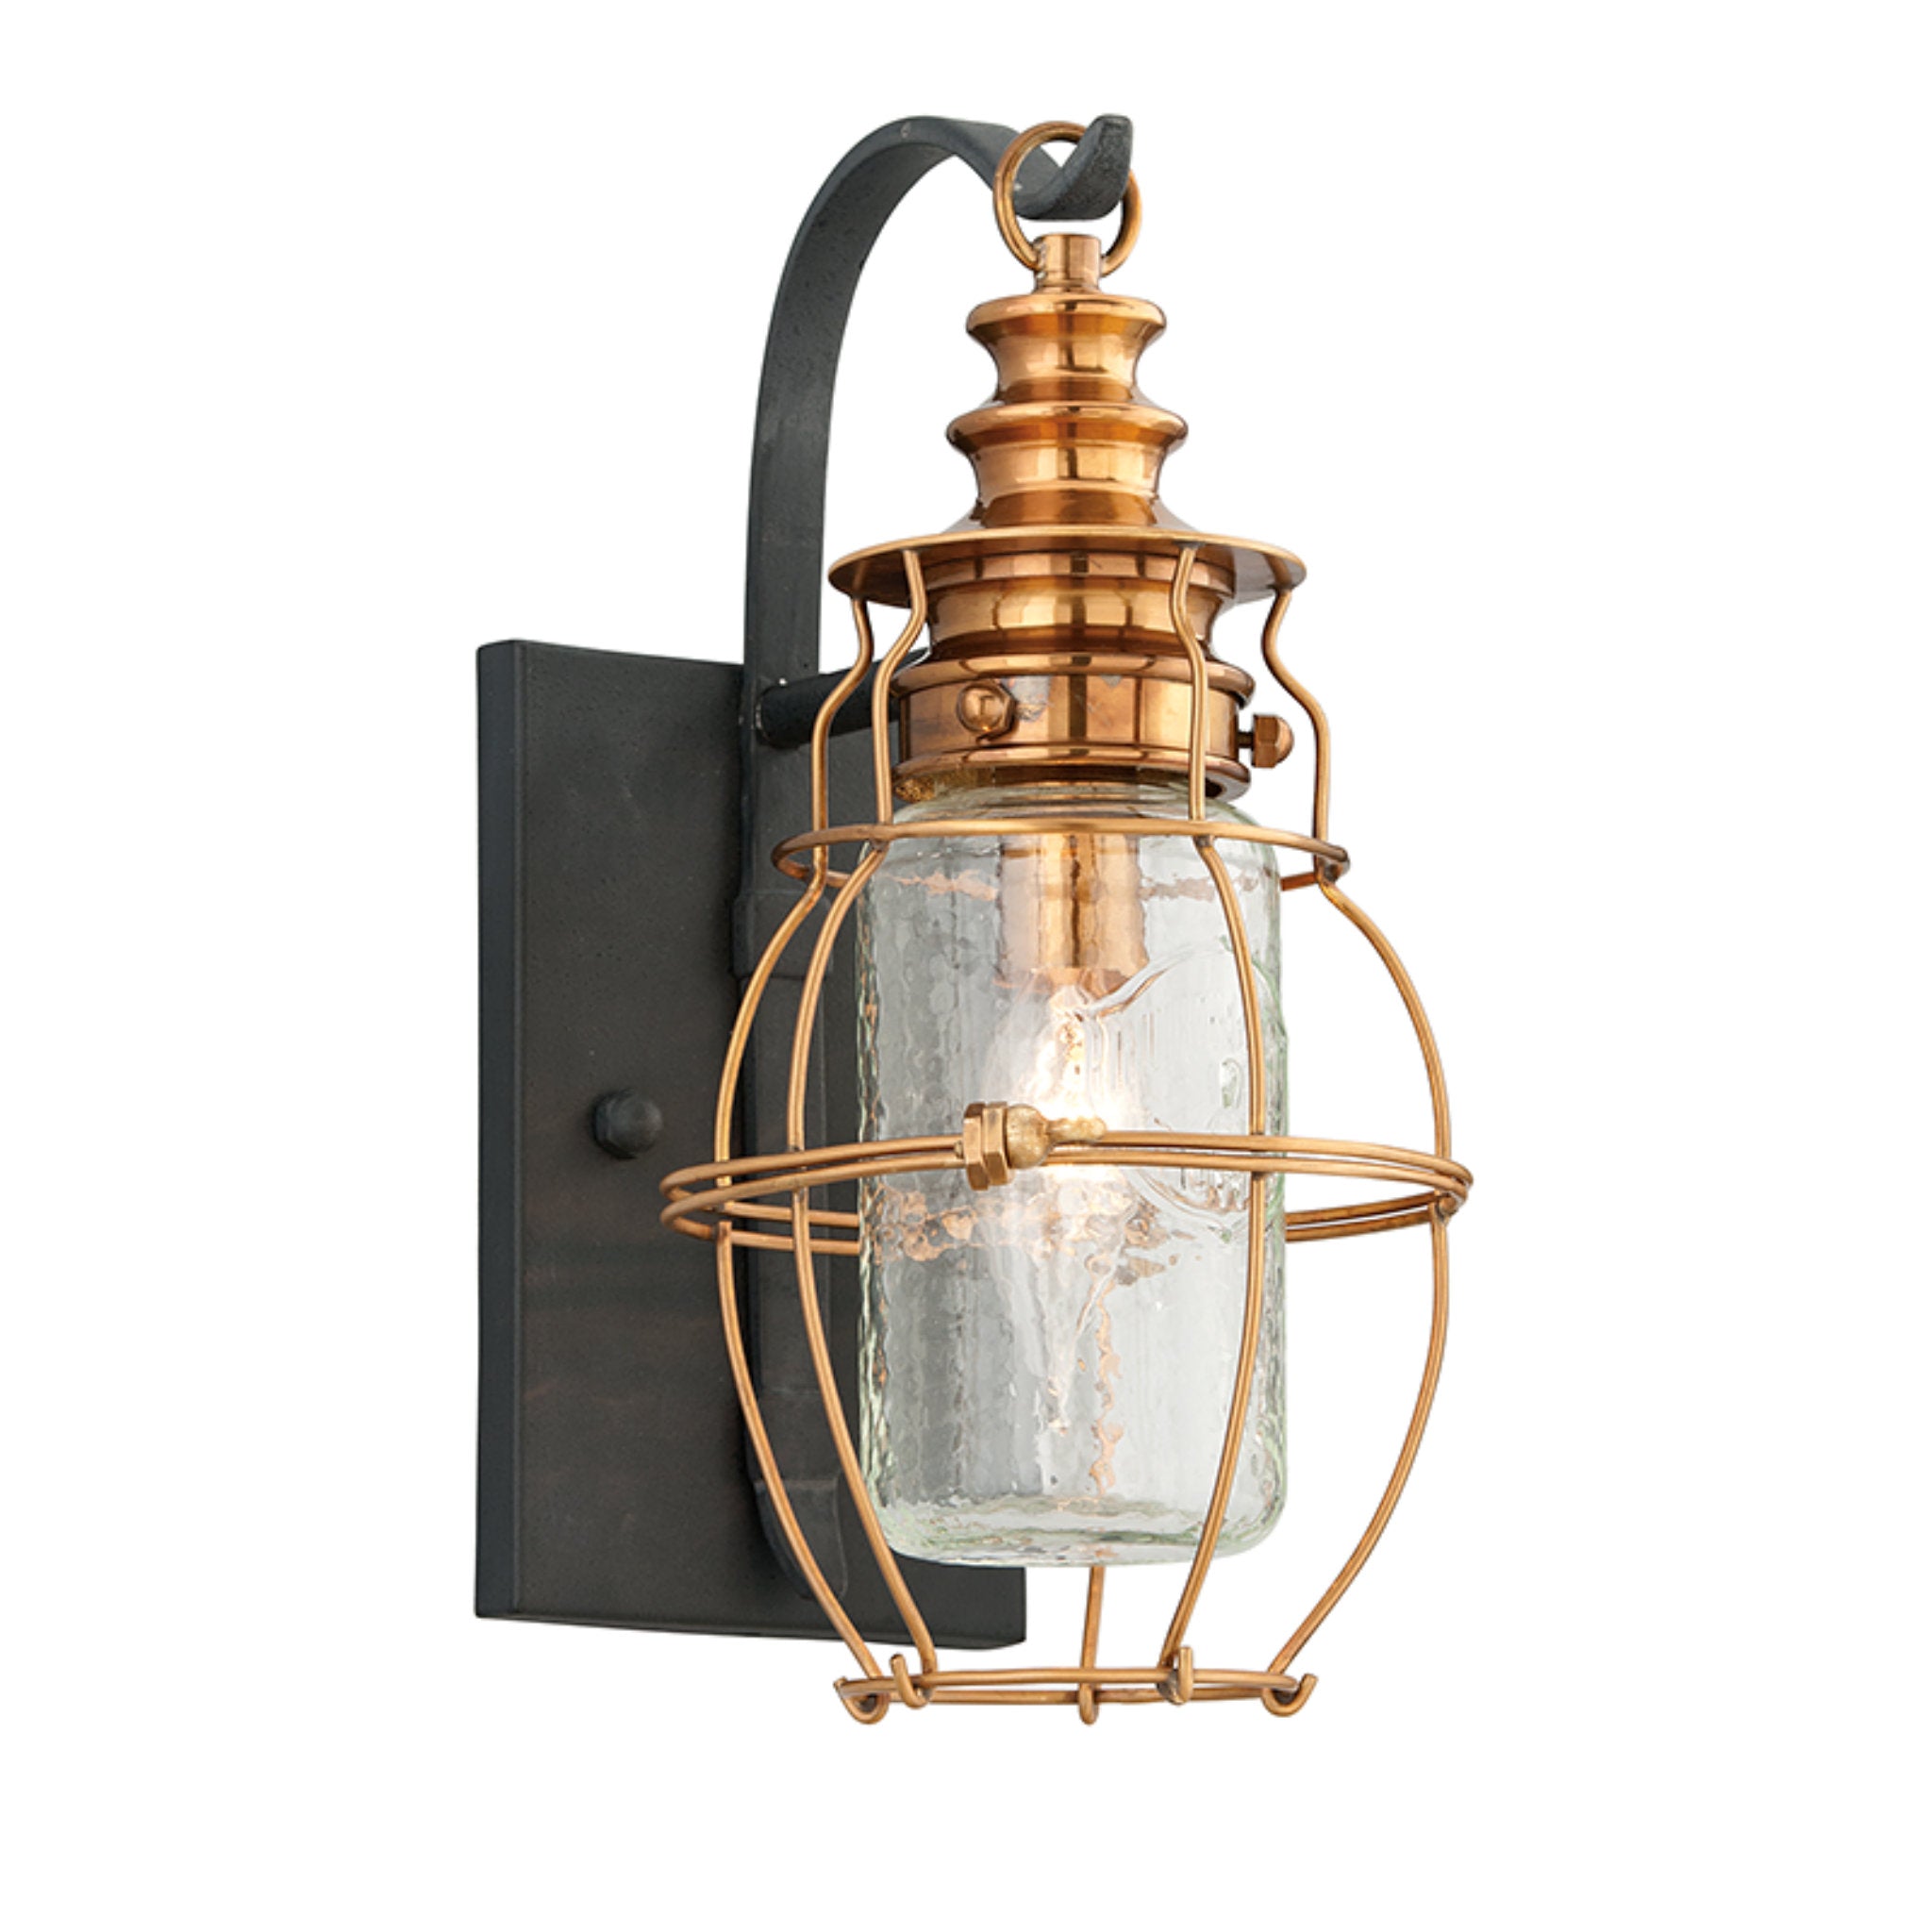 Little Harbor 1 Light Wall Sconce in Aged Brass